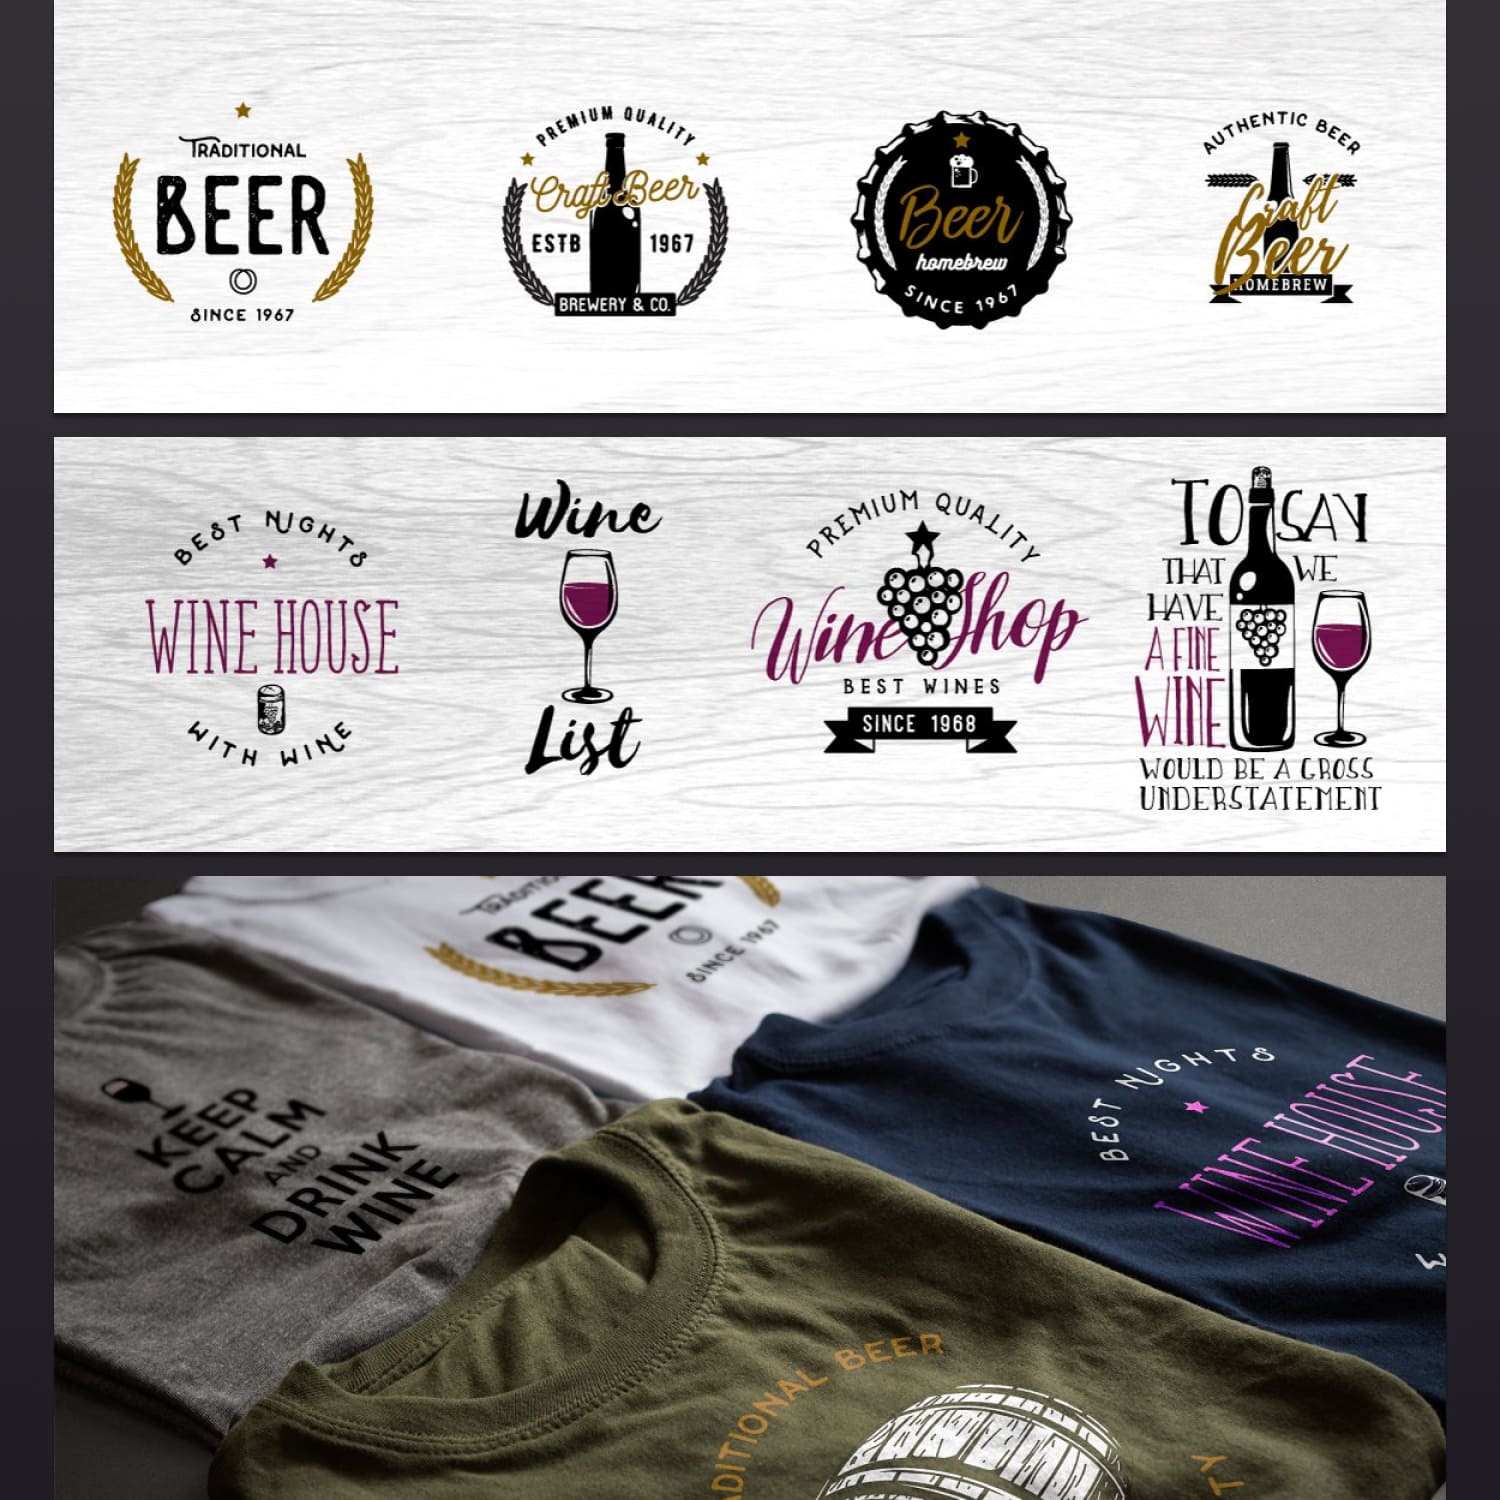 There is a collection of 16 vintage beer (8) and wine (8) themed badges, labels, logotypes, emblems and design elements.